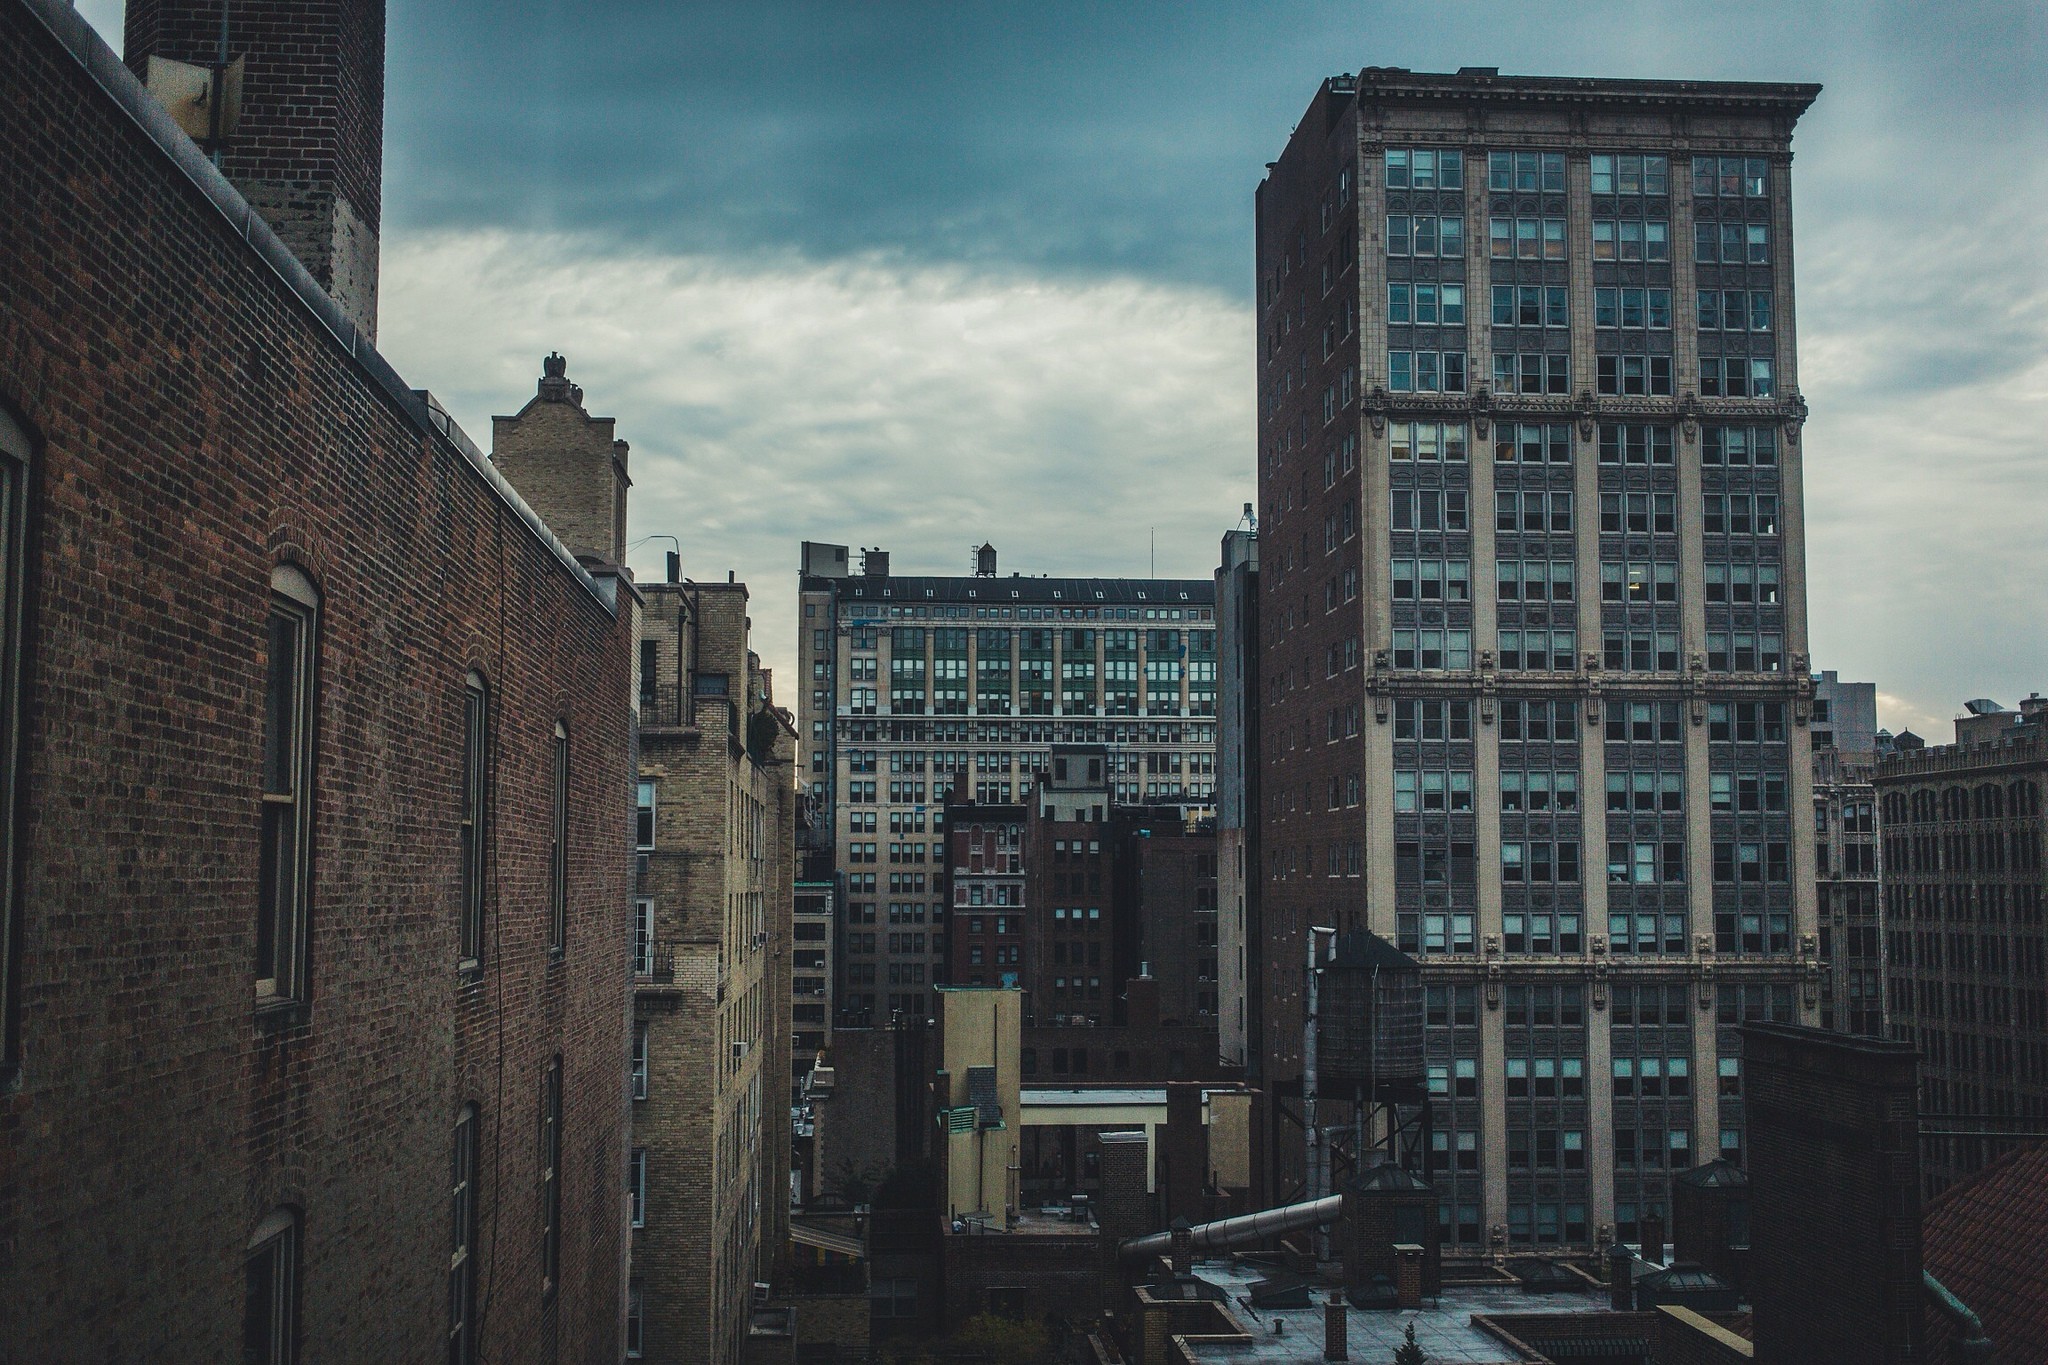 2048x1365 #city, #overcast, #muted, #urban, #building, #abandoned, #cityscape,  wallpaper